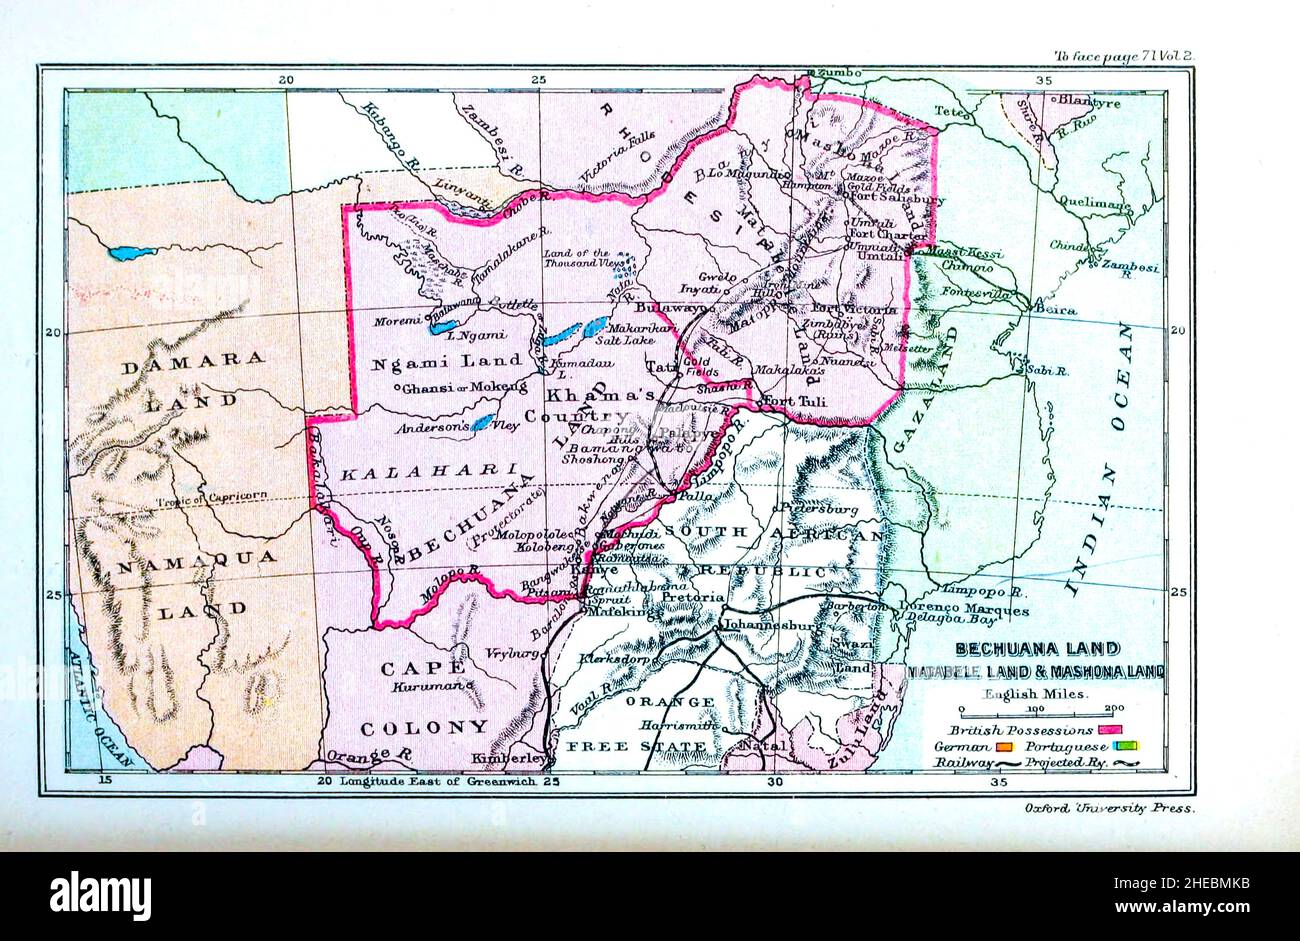 Bechuanaland Protectorate, Matabeleland and Mashonaland from the book HISTORICAL GEOGRAPHY OF THE BRITISH COLONIES printed in 1897 Stock Photo